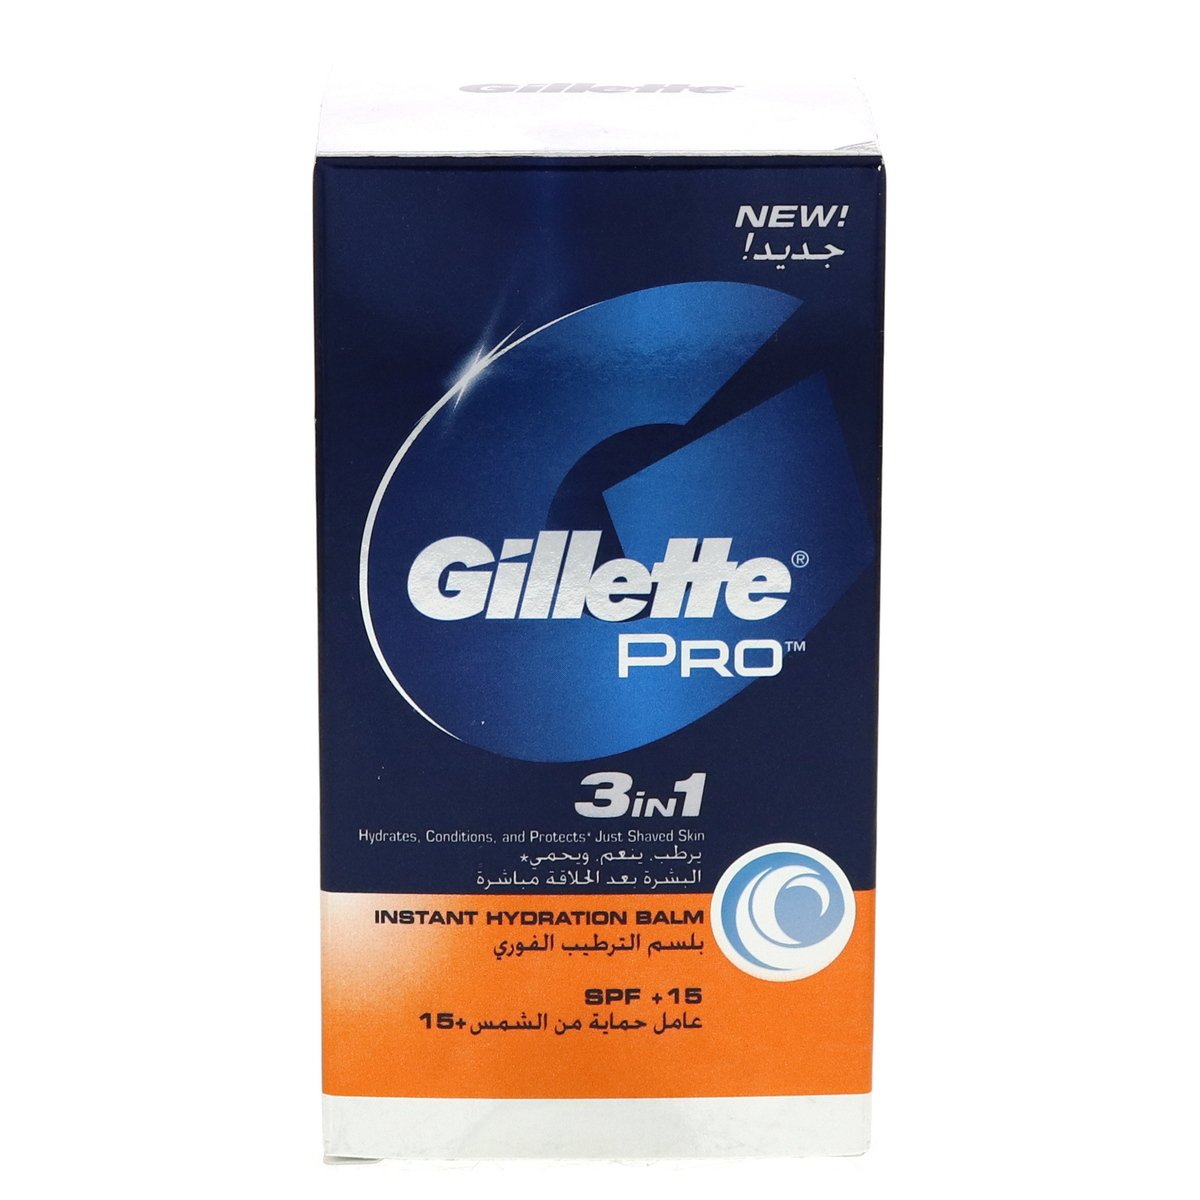 Gillette Pro 3 In1 Instant Hydration Balm SPF +15 50 ml